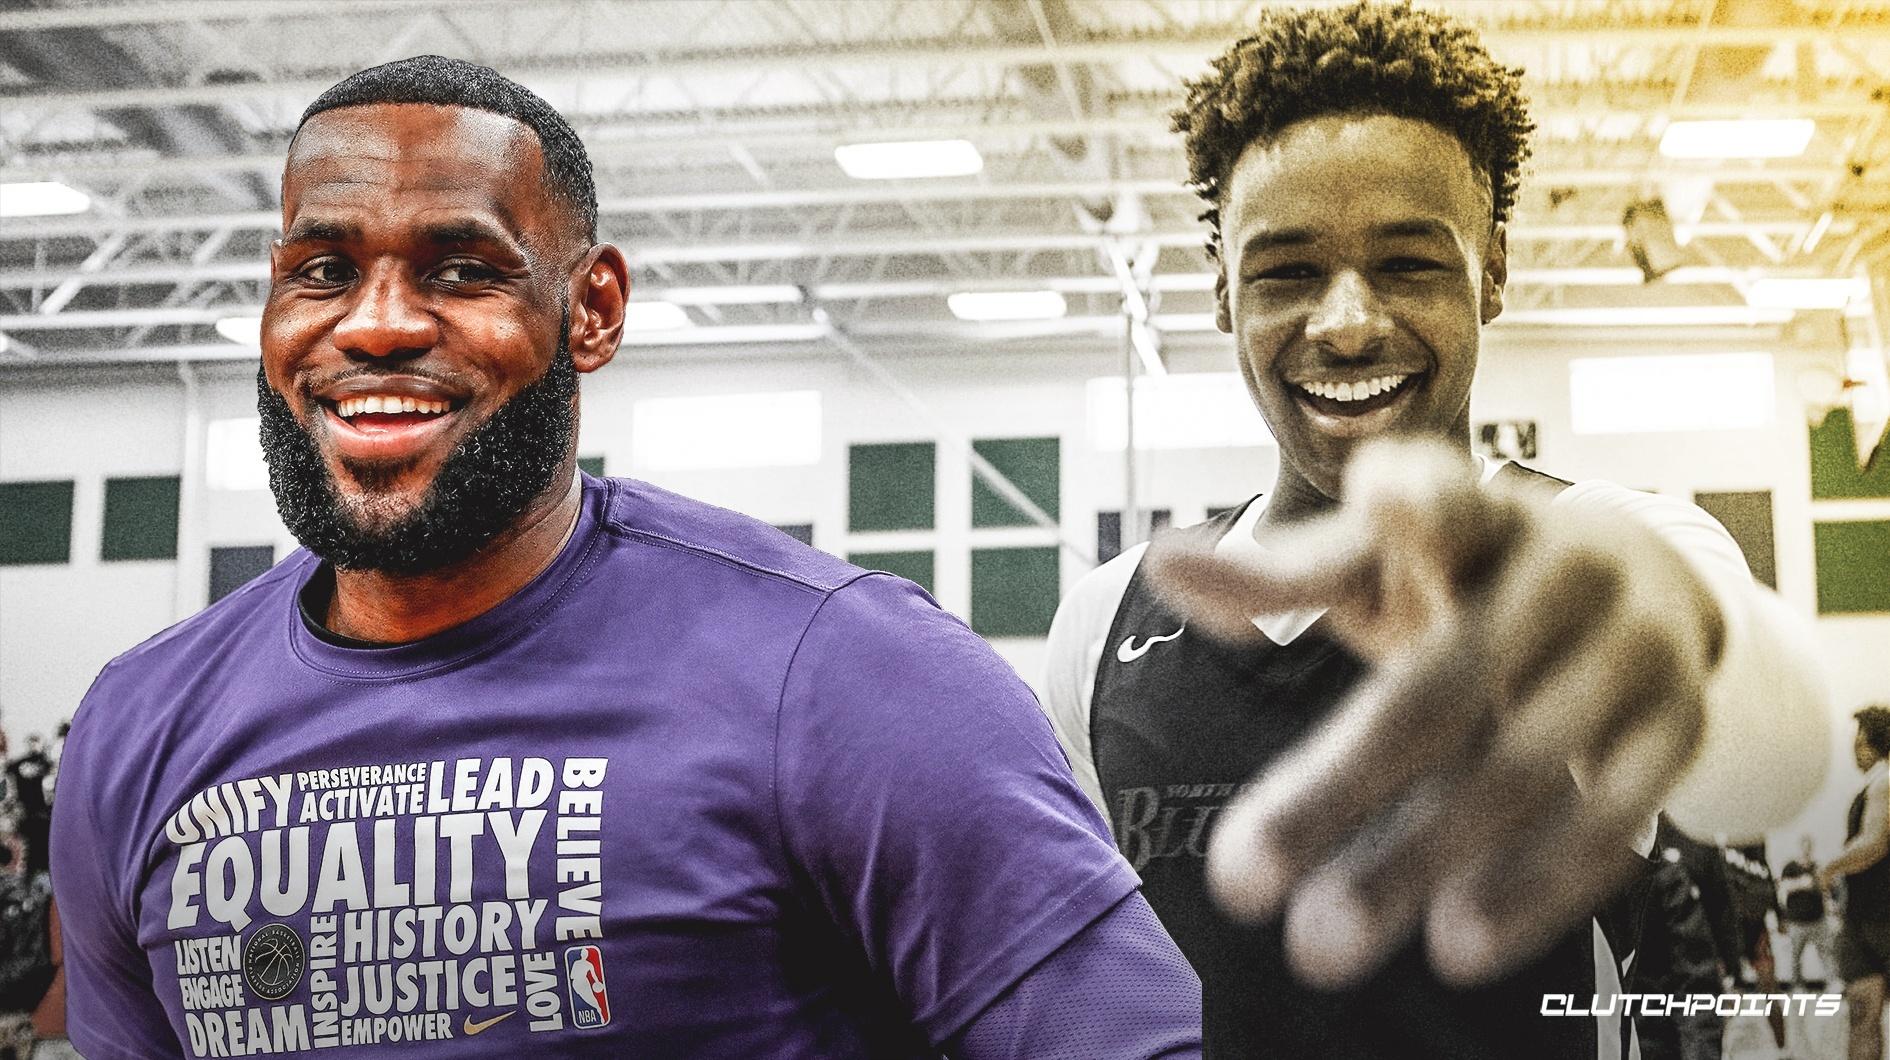 Bronny James reaches 100K followers in 51 minutes thanks to